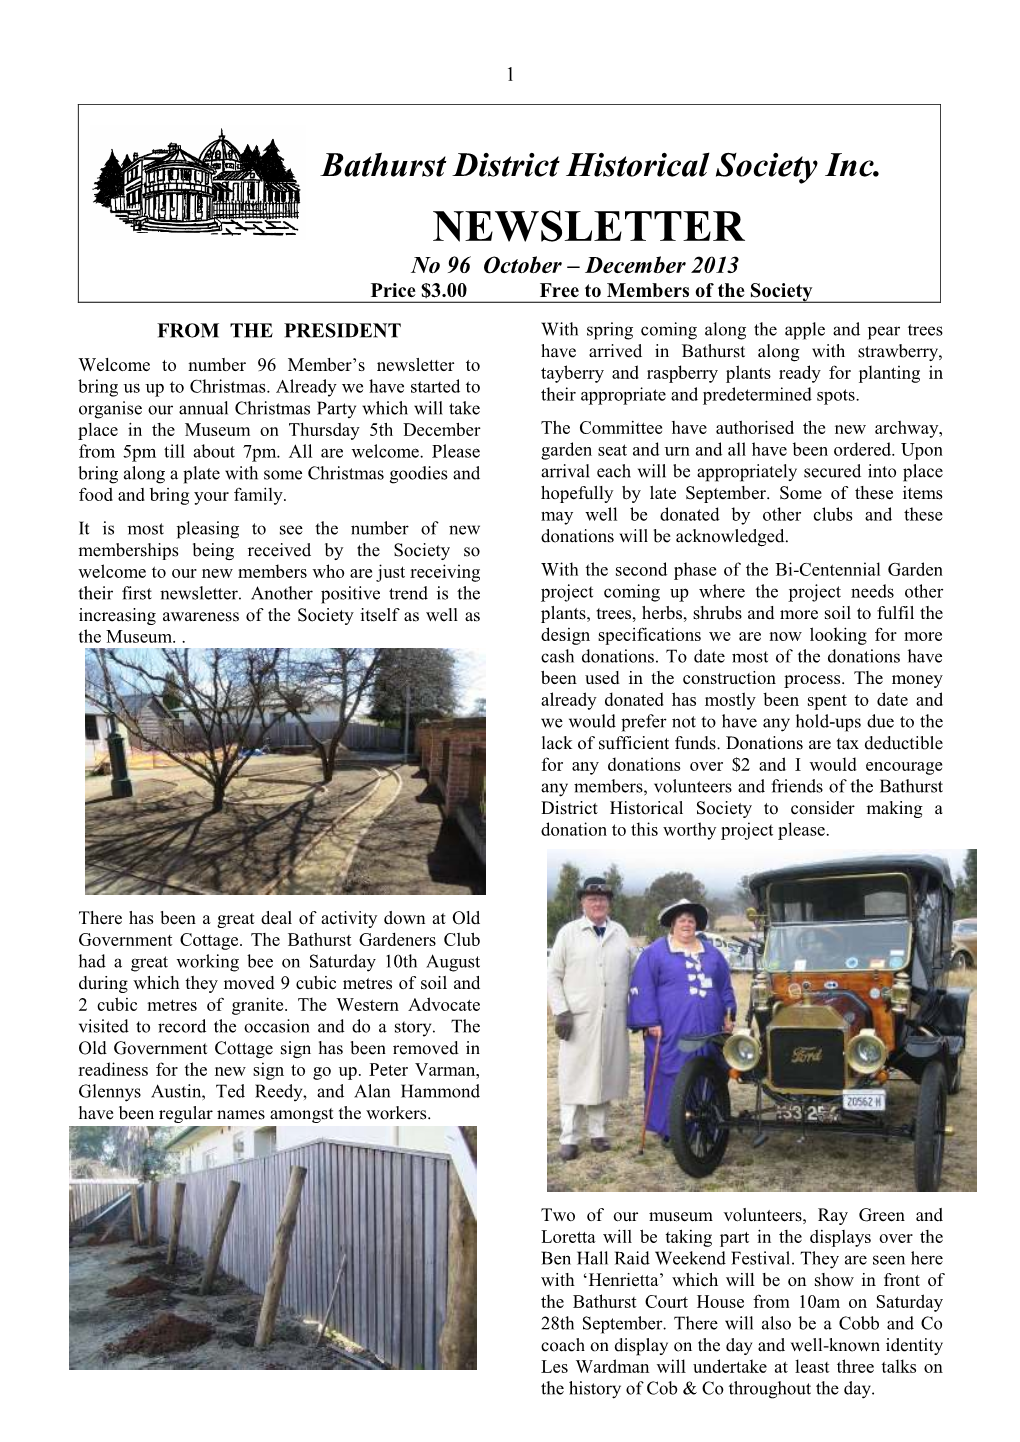 NEWSLETTER No 96 October – December 2013 Price $3.00 Free to Members of the Society